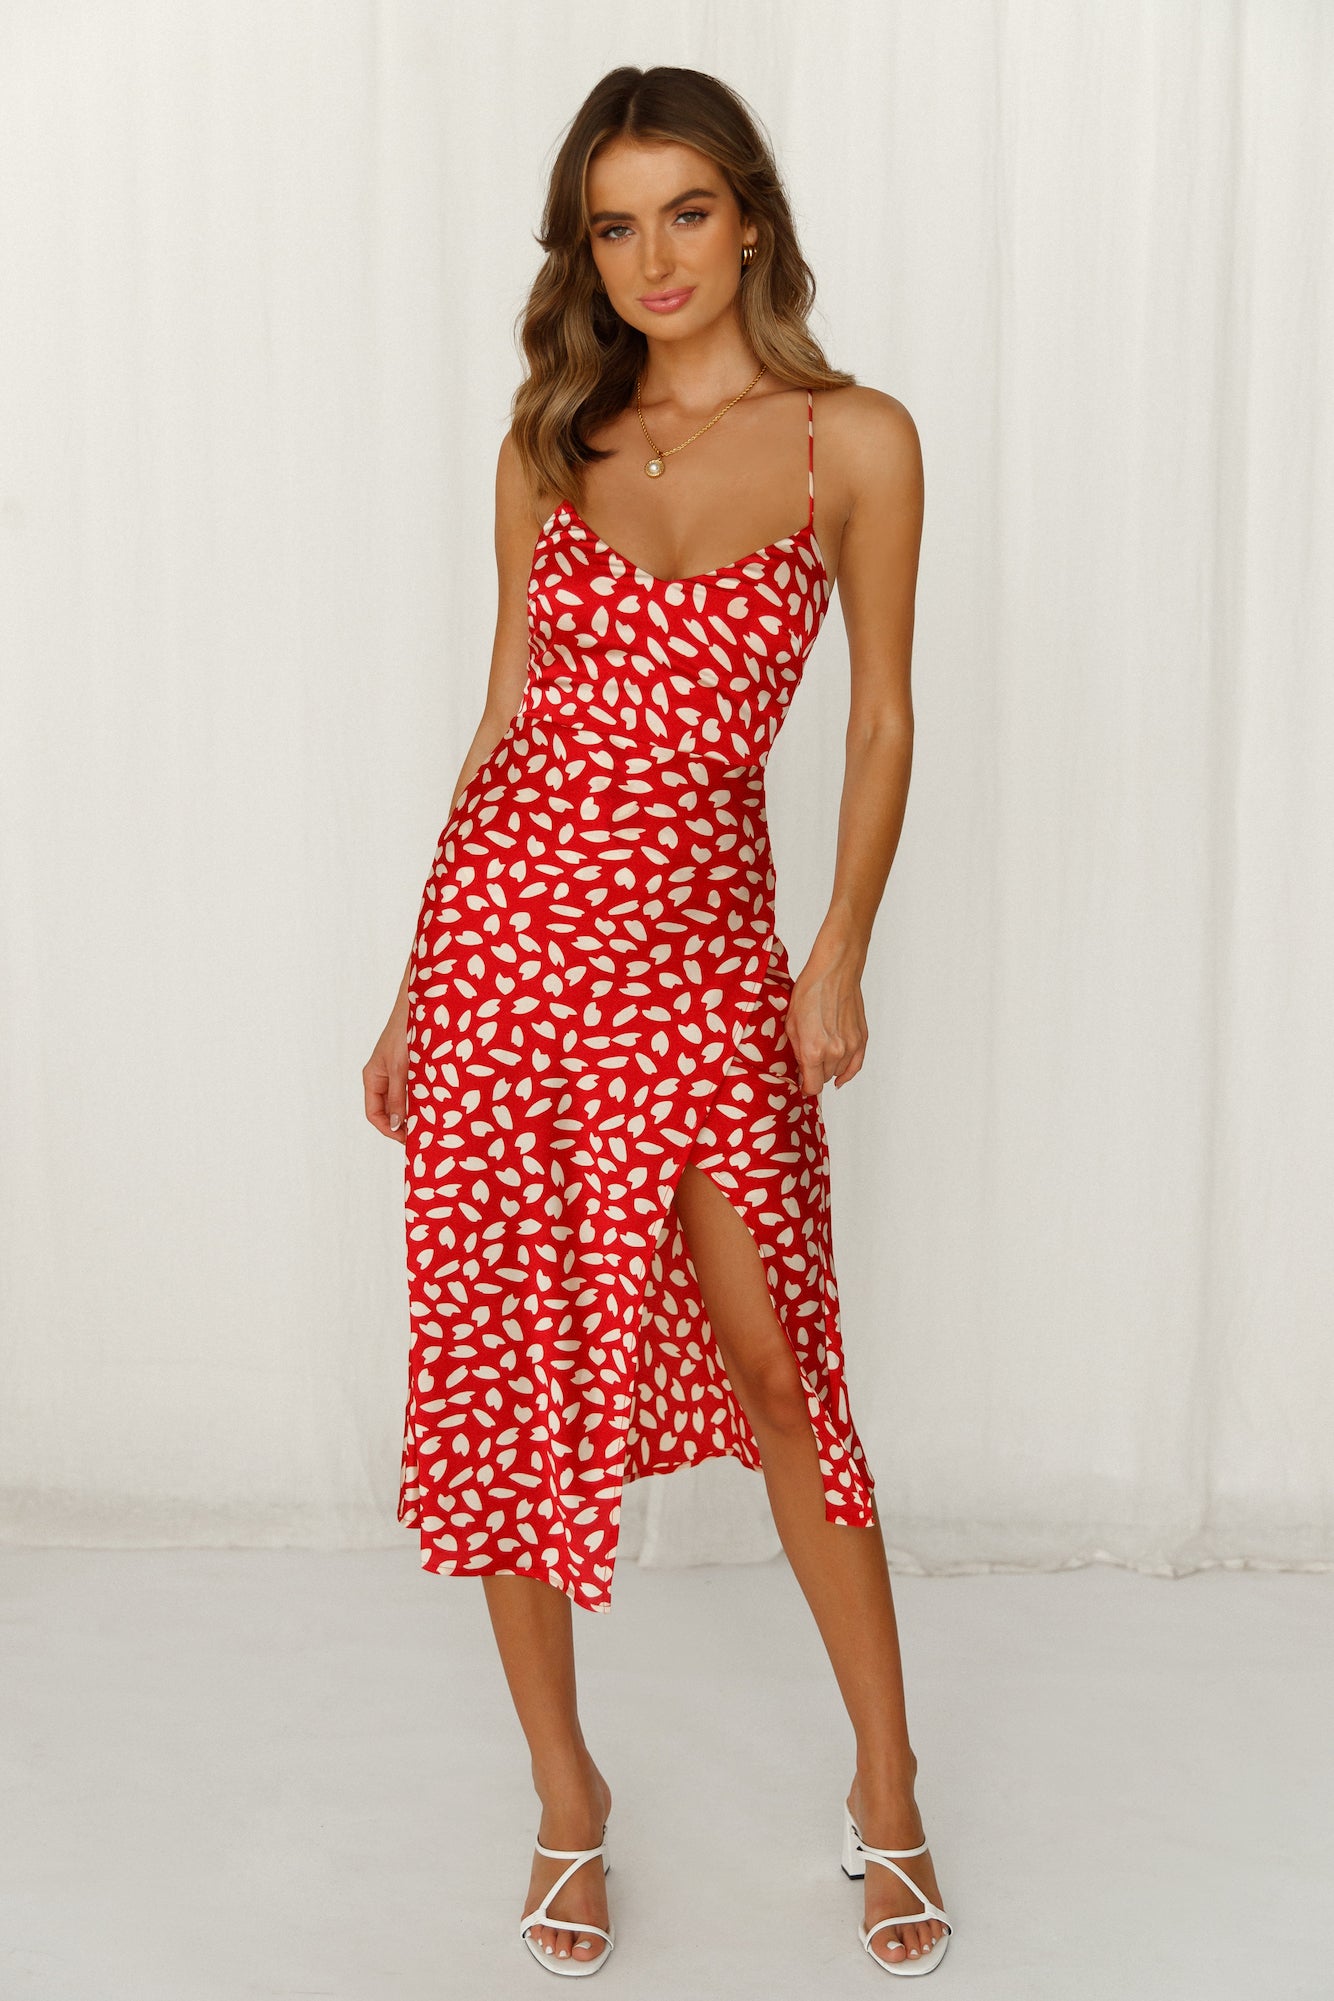 Top Of The Charts Midi Dress Red | Hello Molly